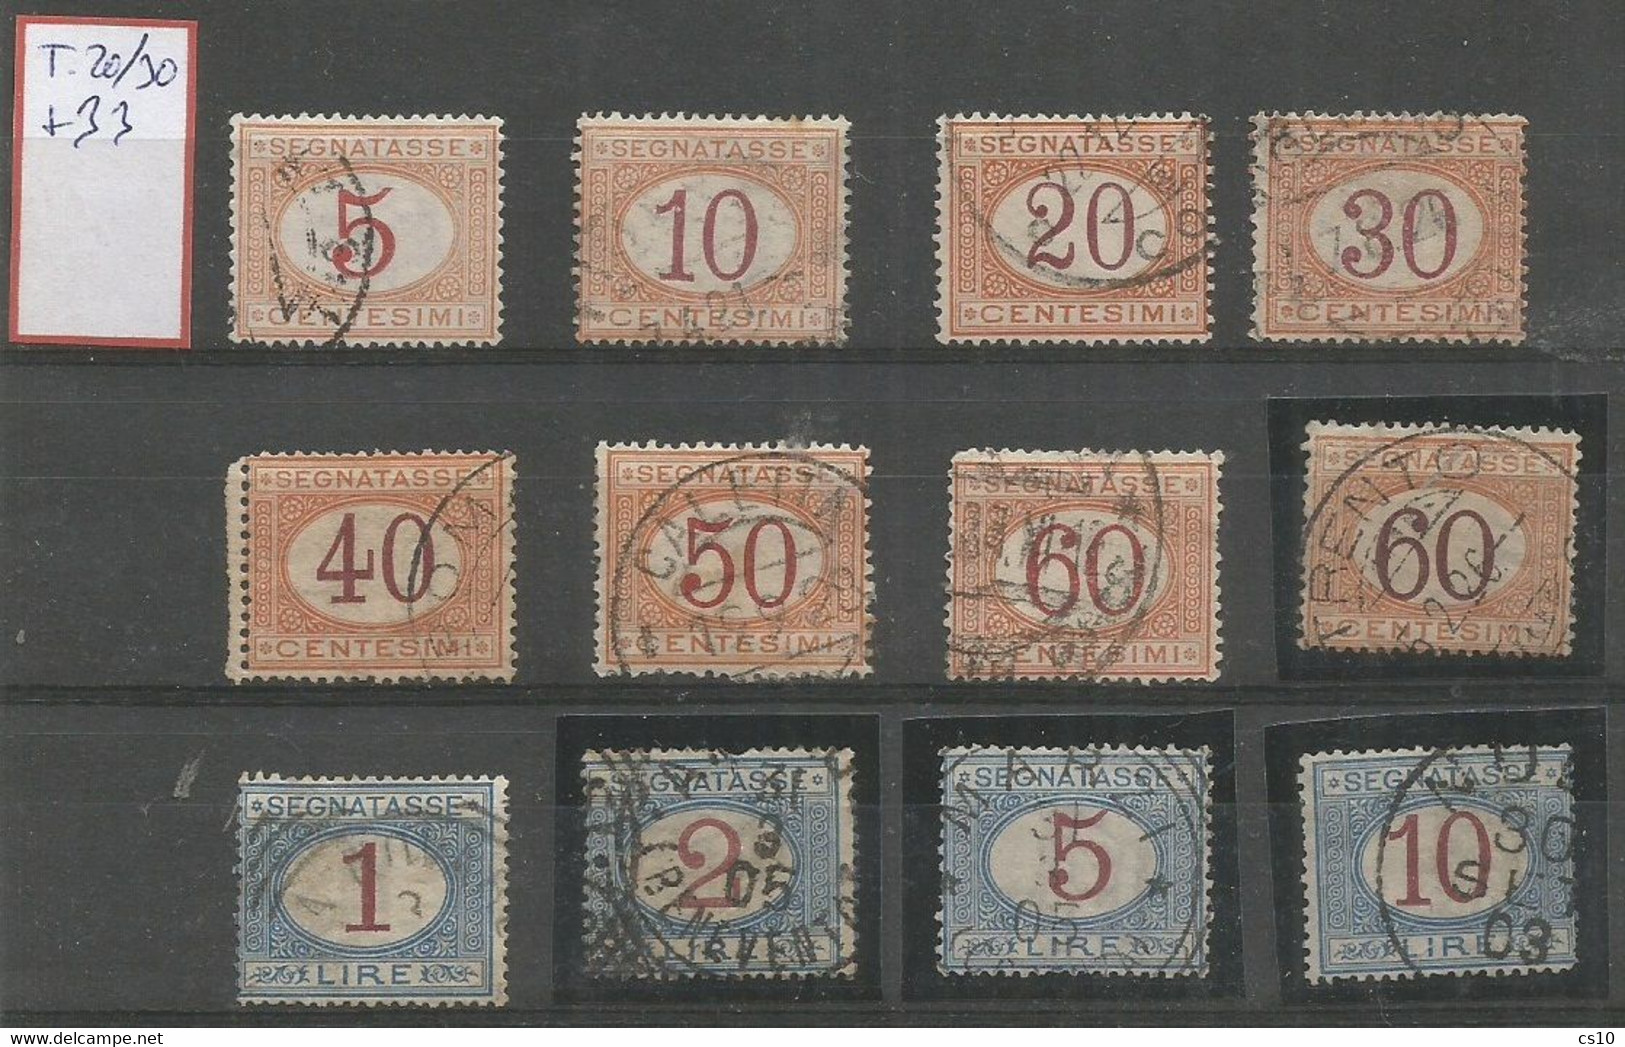 Italy Kingdom 1890/1926 Postage Due Number In Carmine In Orange Oval + Brown Number C.60  #20/30+33  Used - Postage Due